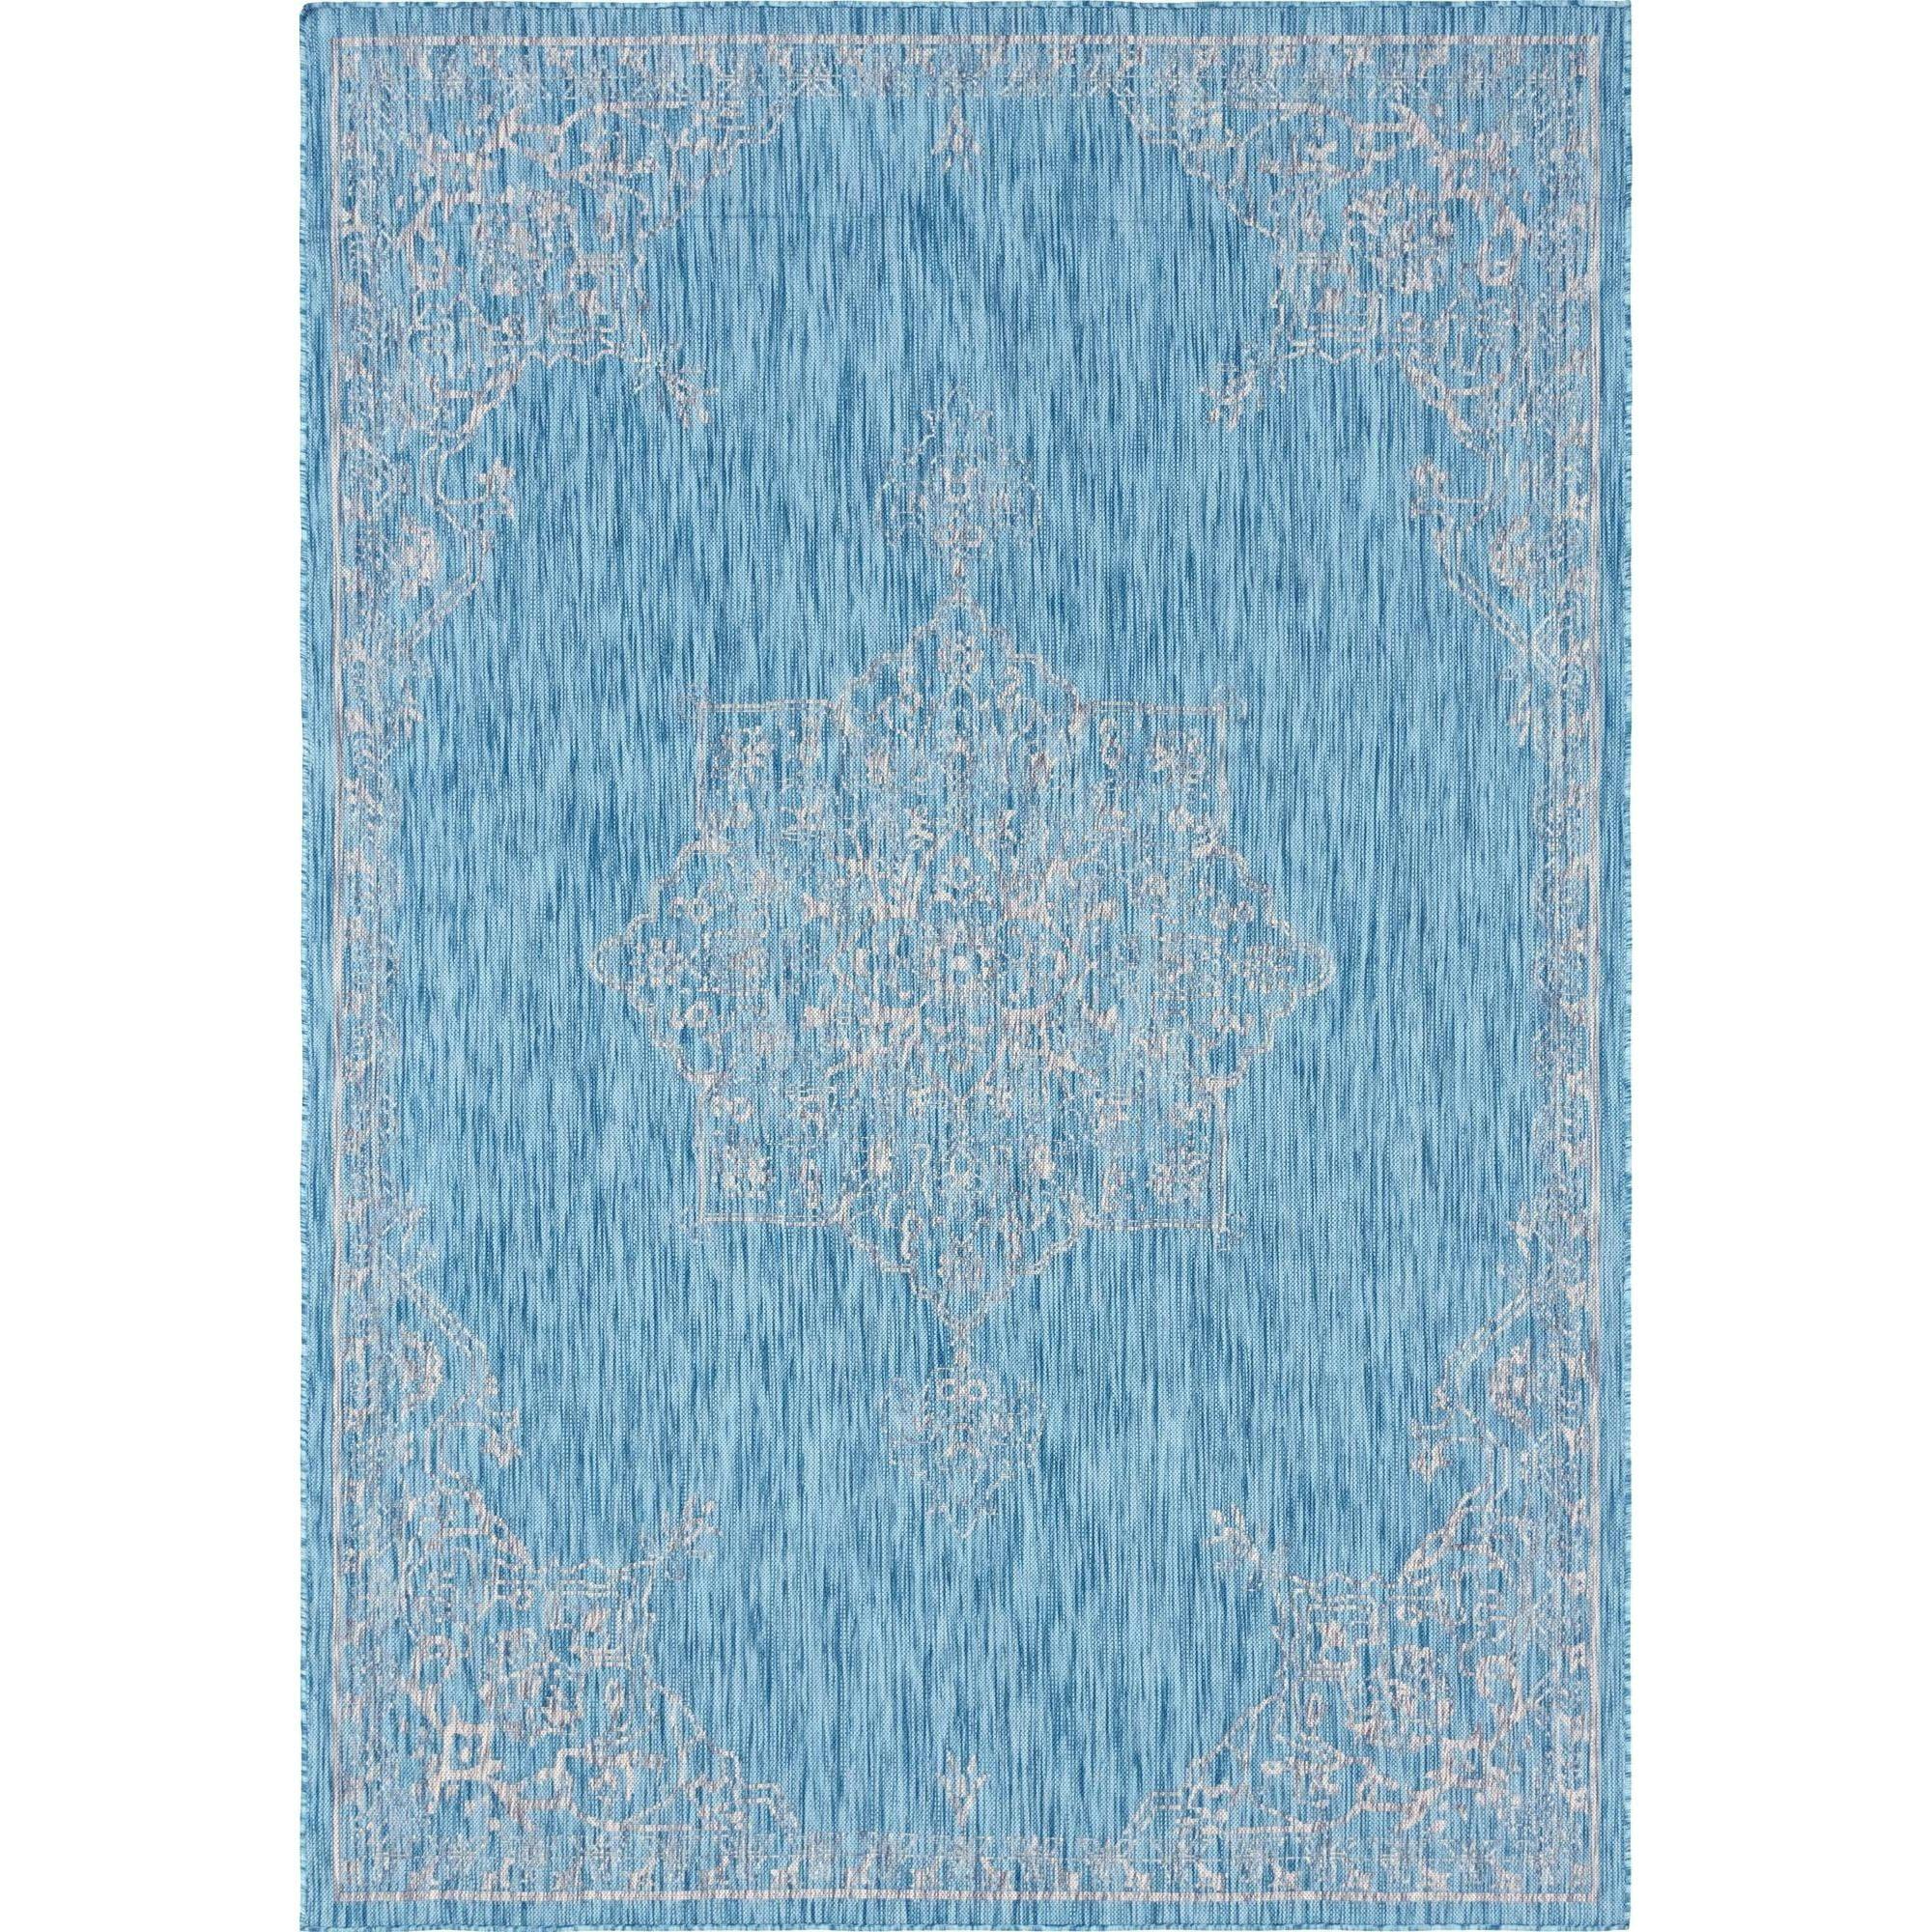 Aqua Bliss Easy-Care Synthetic 7' x 10' Outdoor Rug